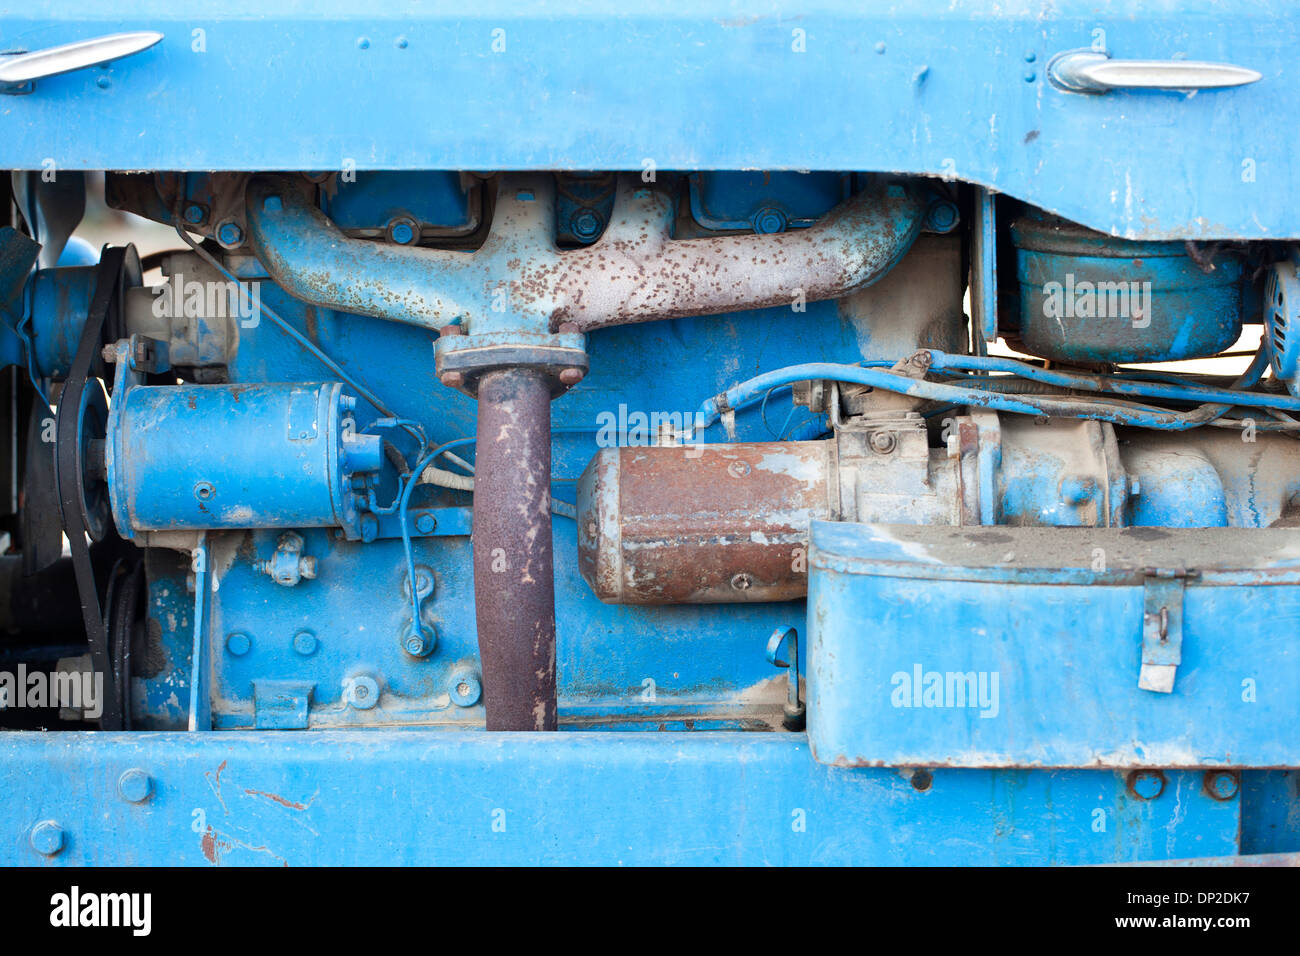 Close-up view of the engine of an old tractor Stock Photo